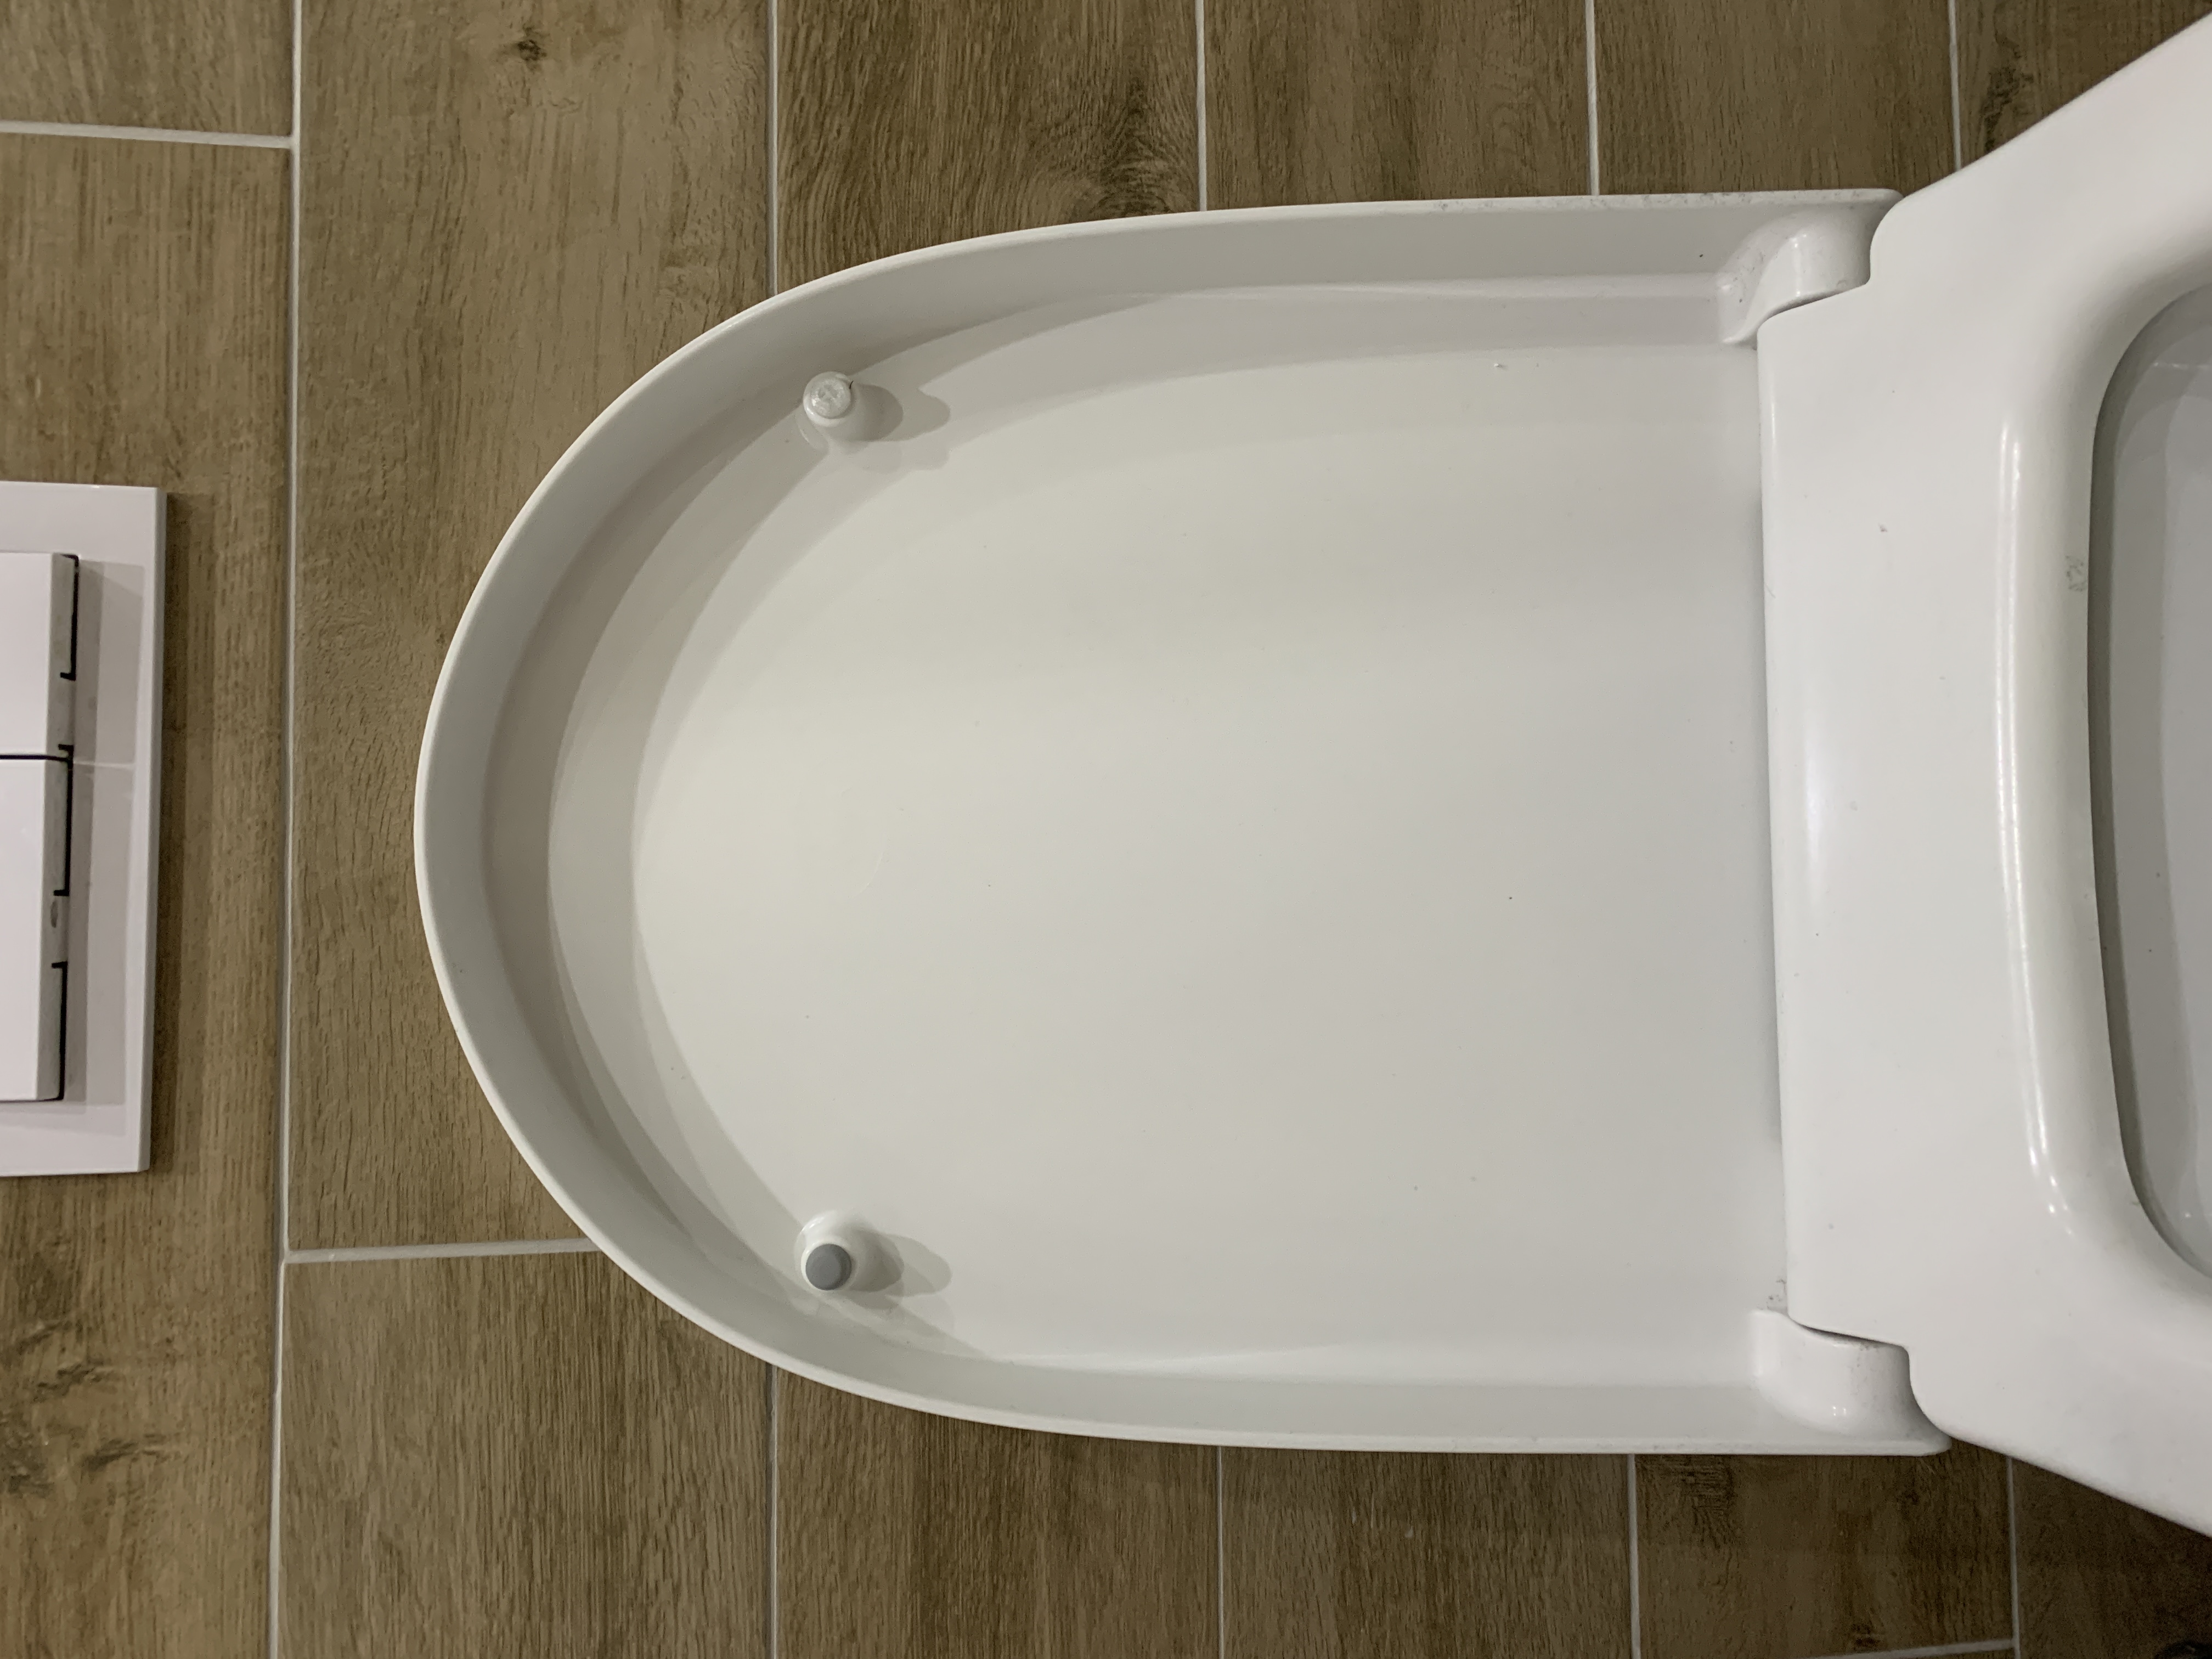 Toilet seat rubber bumper replacement